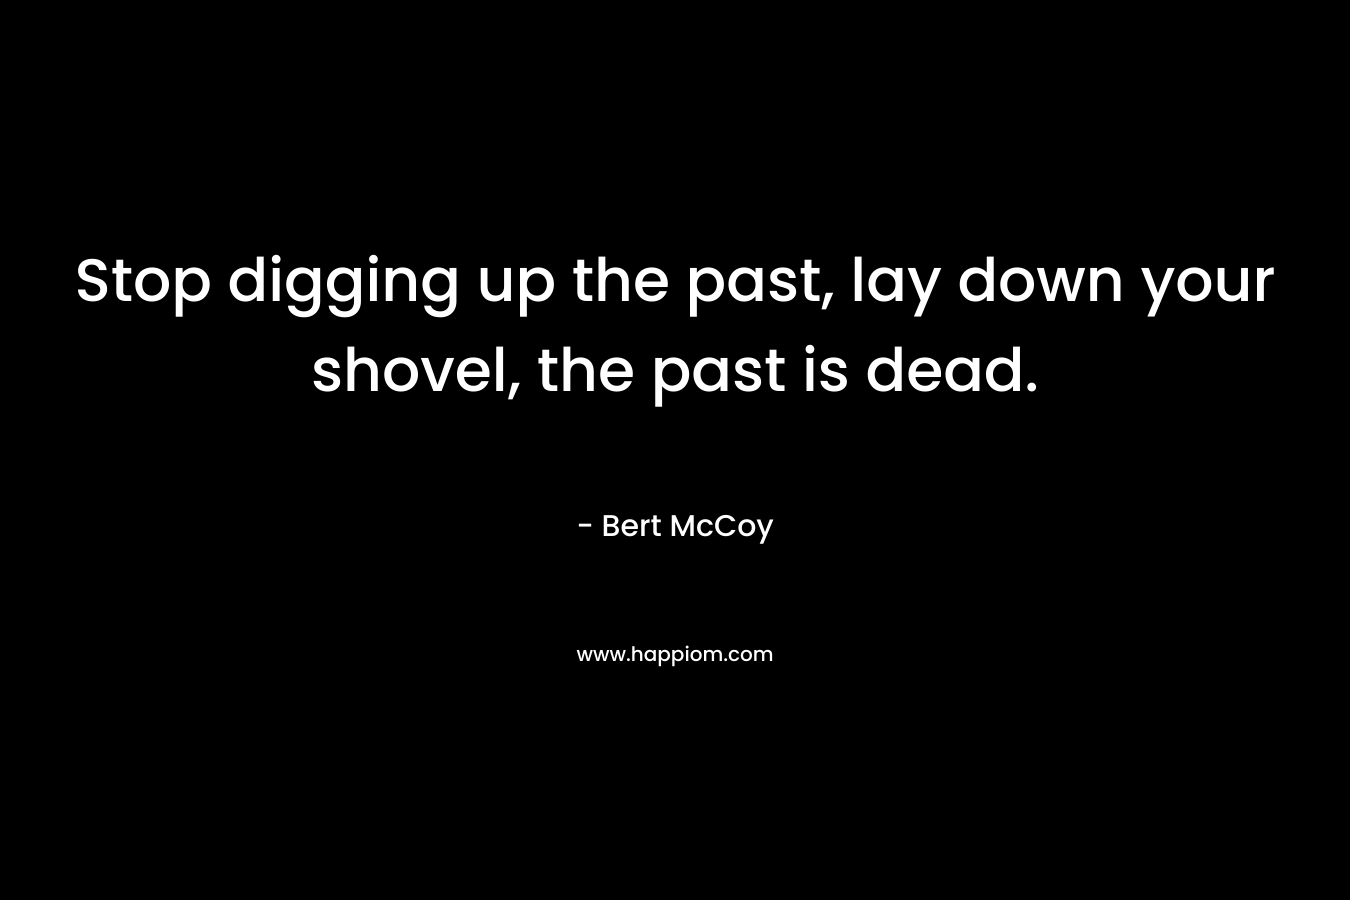 Stop digging up the past, lay down your shovel, the past is dead. – Bert McCoy